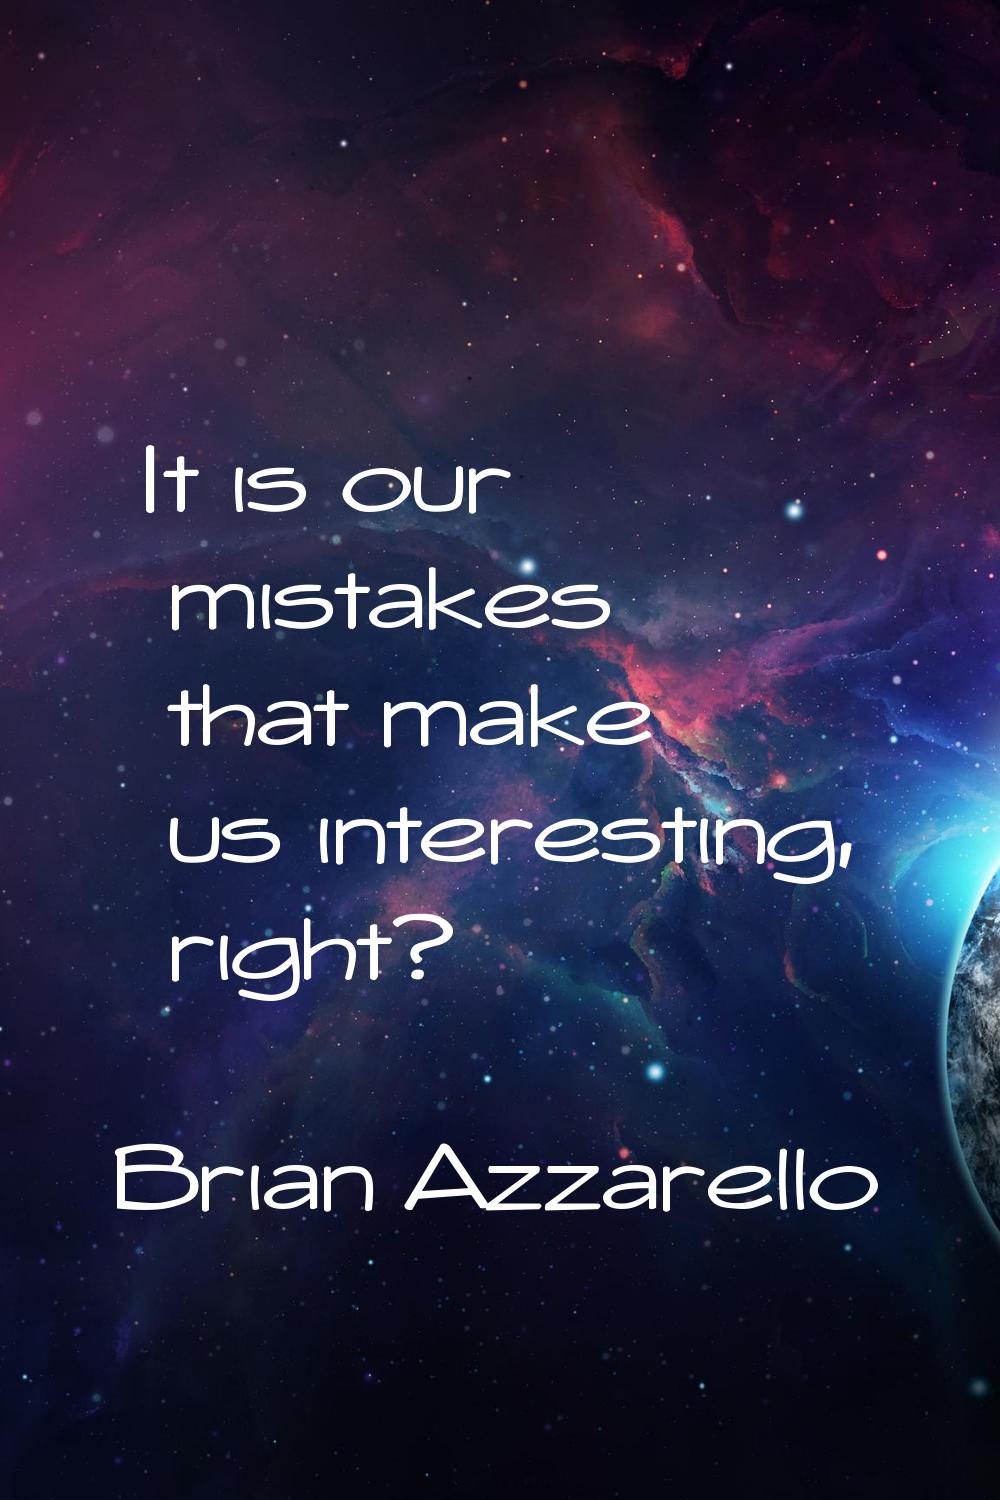 It is our mistakes that make us interesting, right?